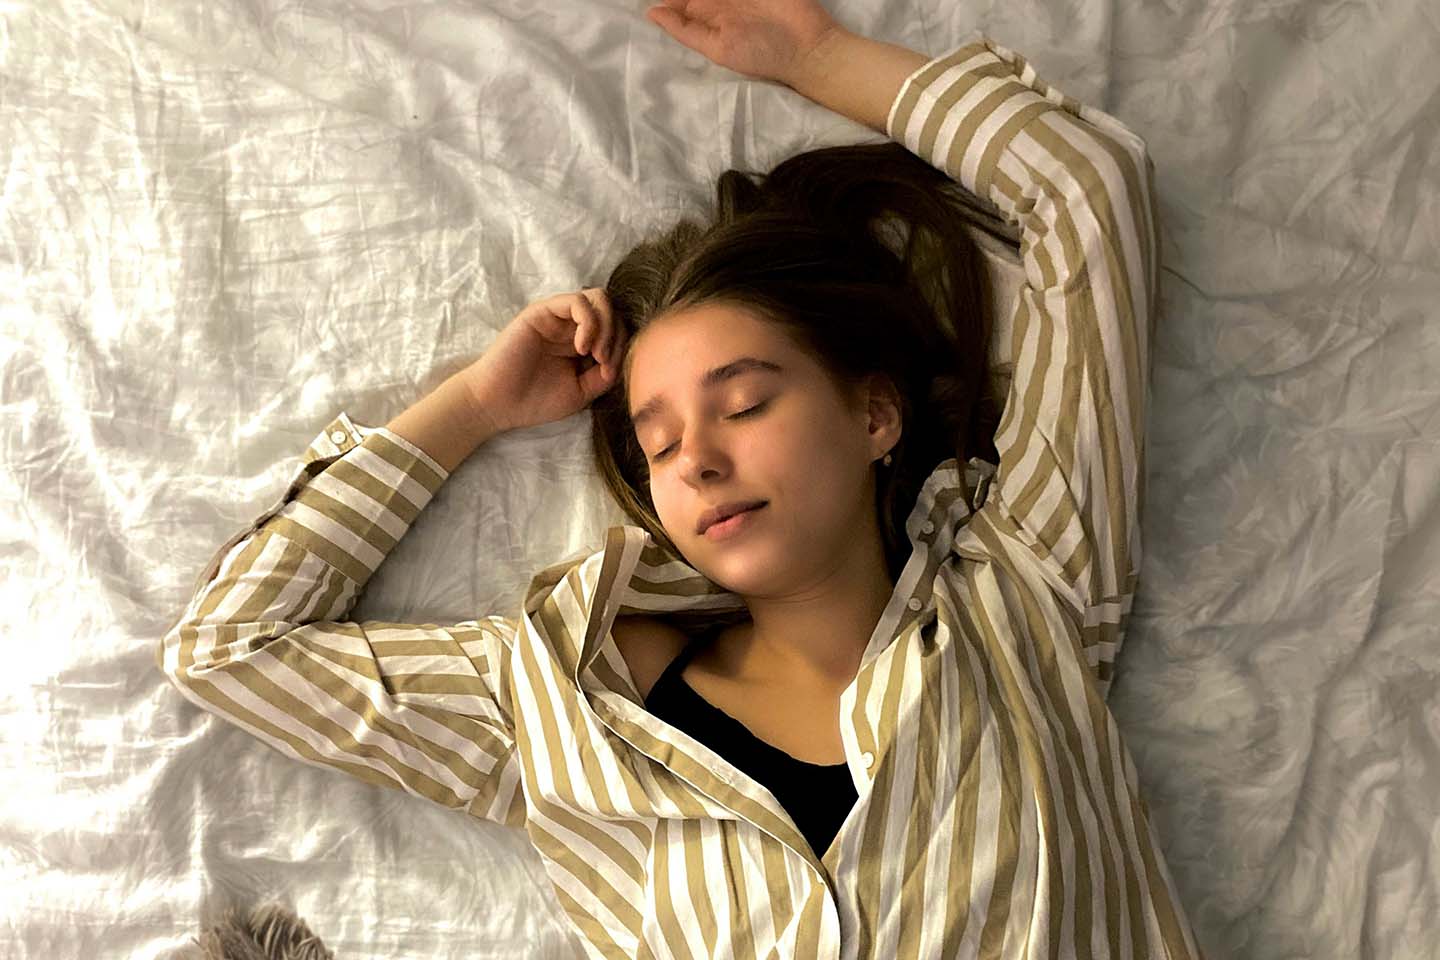 Woman in white and black striped long sleeve shirt lying on bed